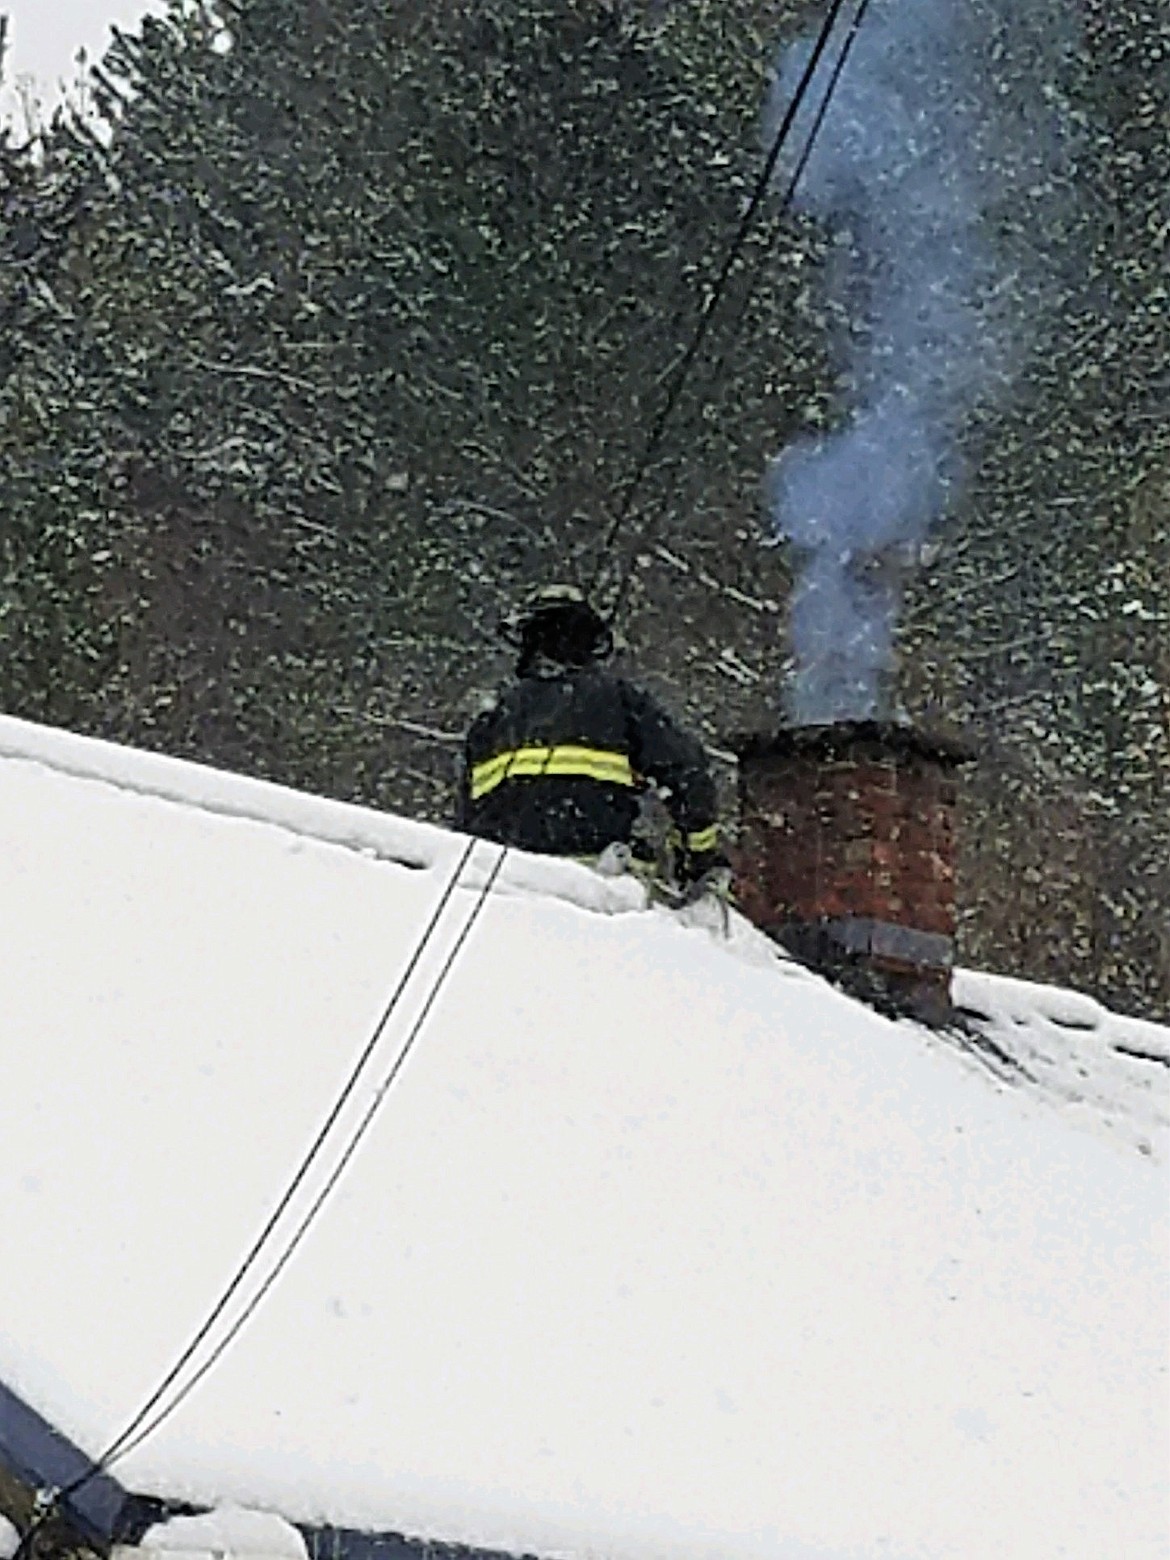 Shoshone County Fire District No. 2 firefighter Lavoryn Nguyen checks out the fire in the chimney on Feb. 6.